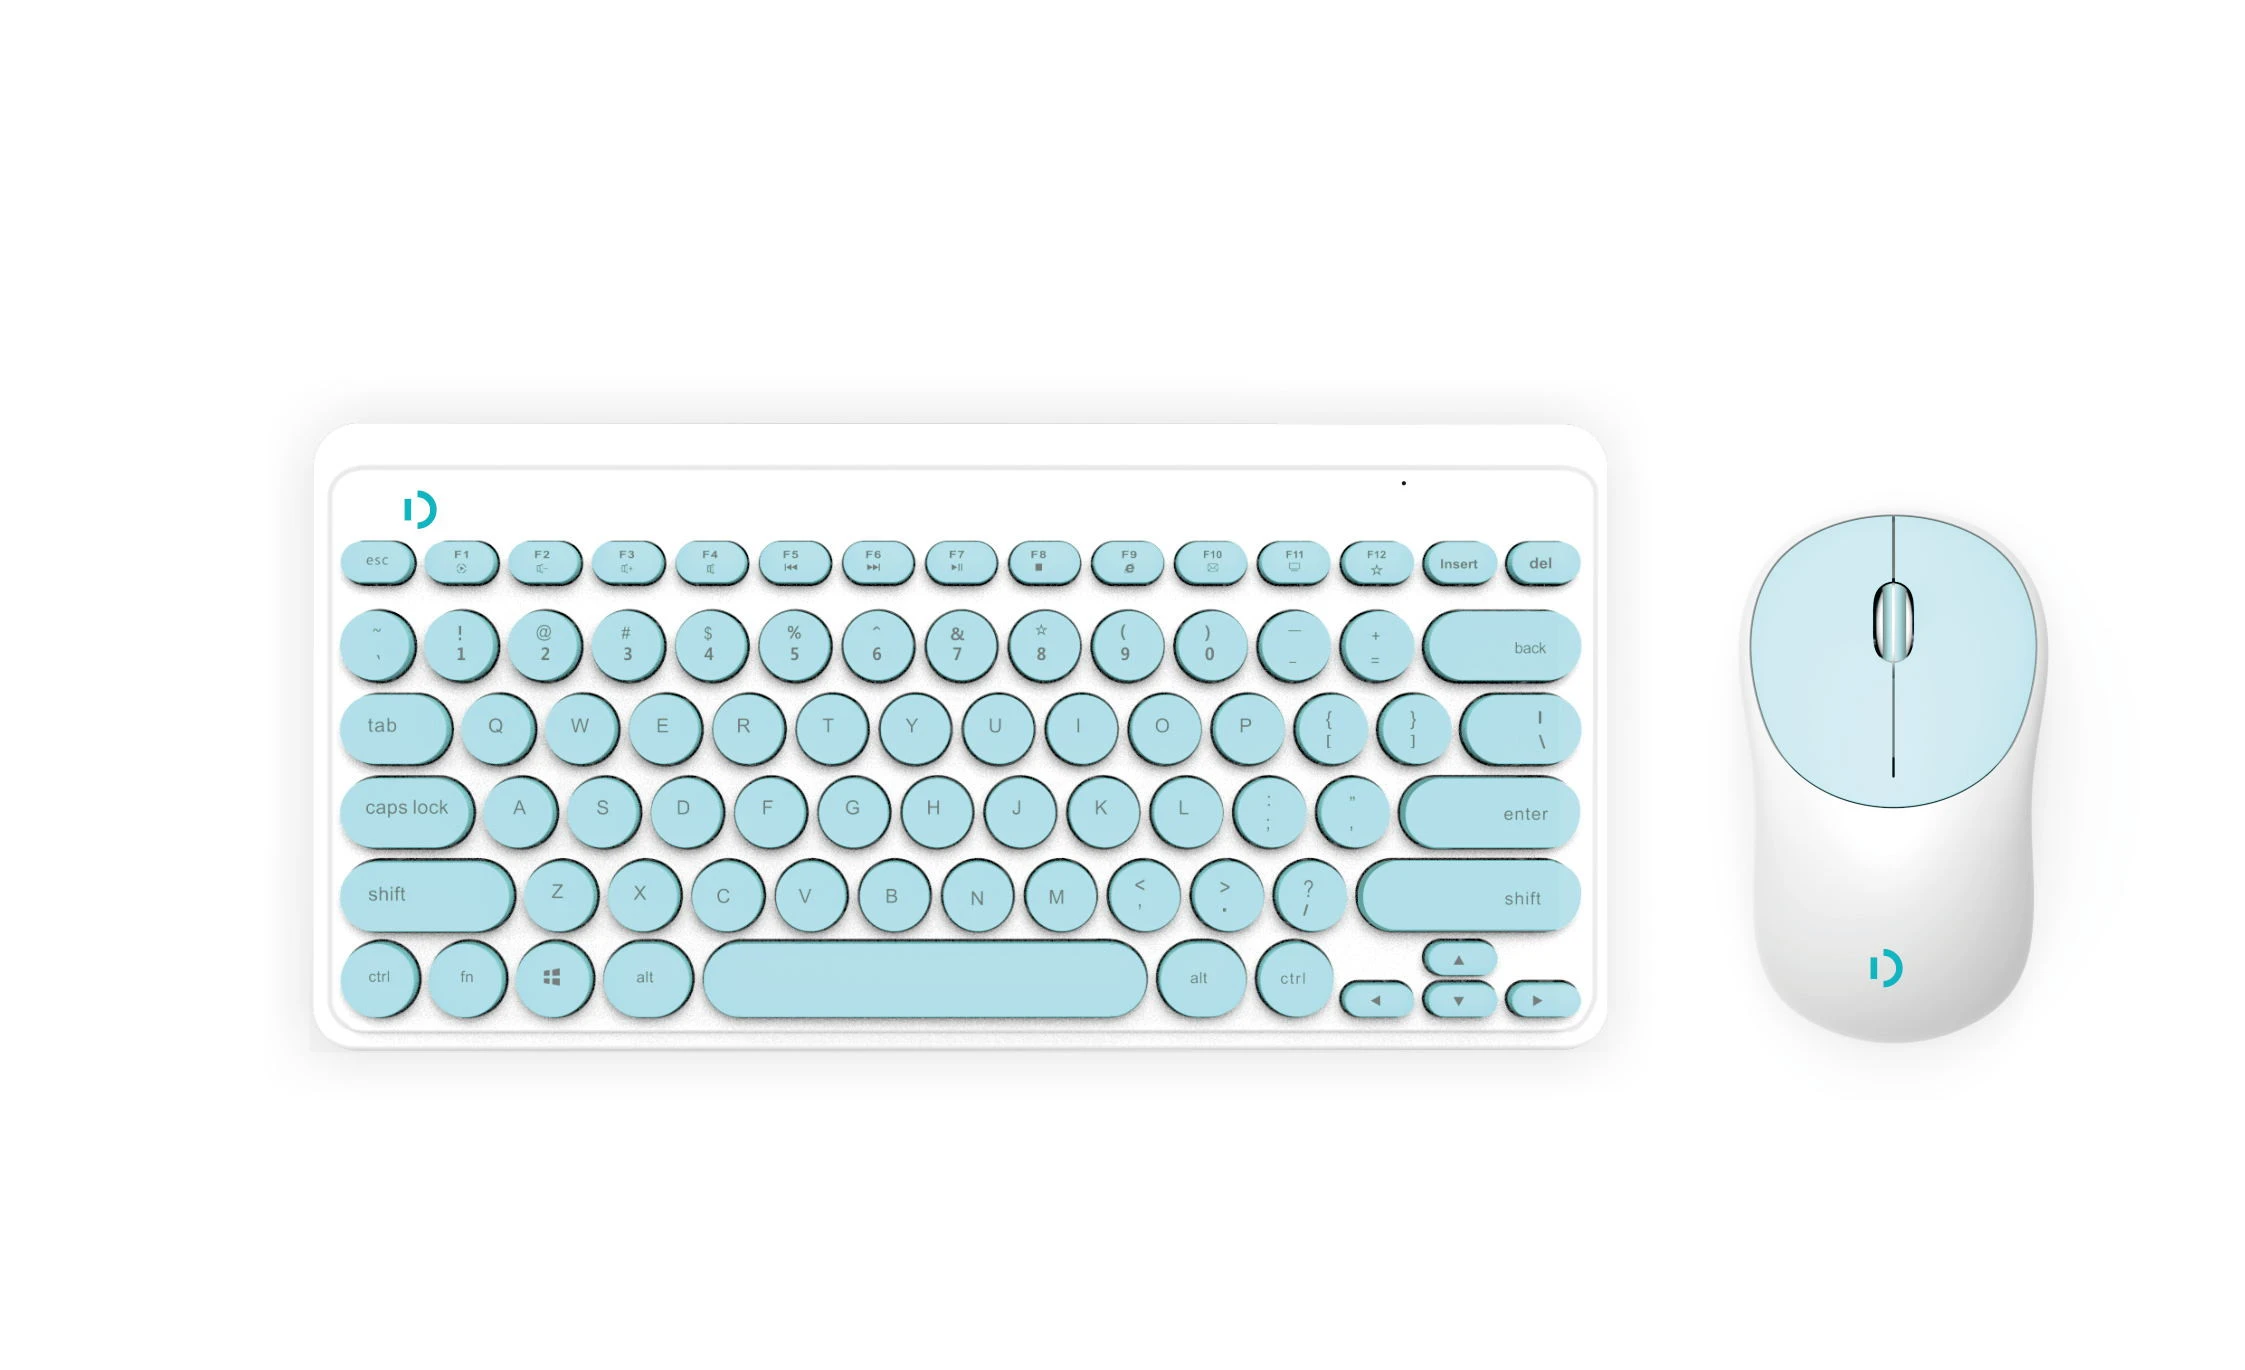 New Arrival Latest Design Multi-media 2.4G Wireless Keyboard and mouse Combo for Home Office